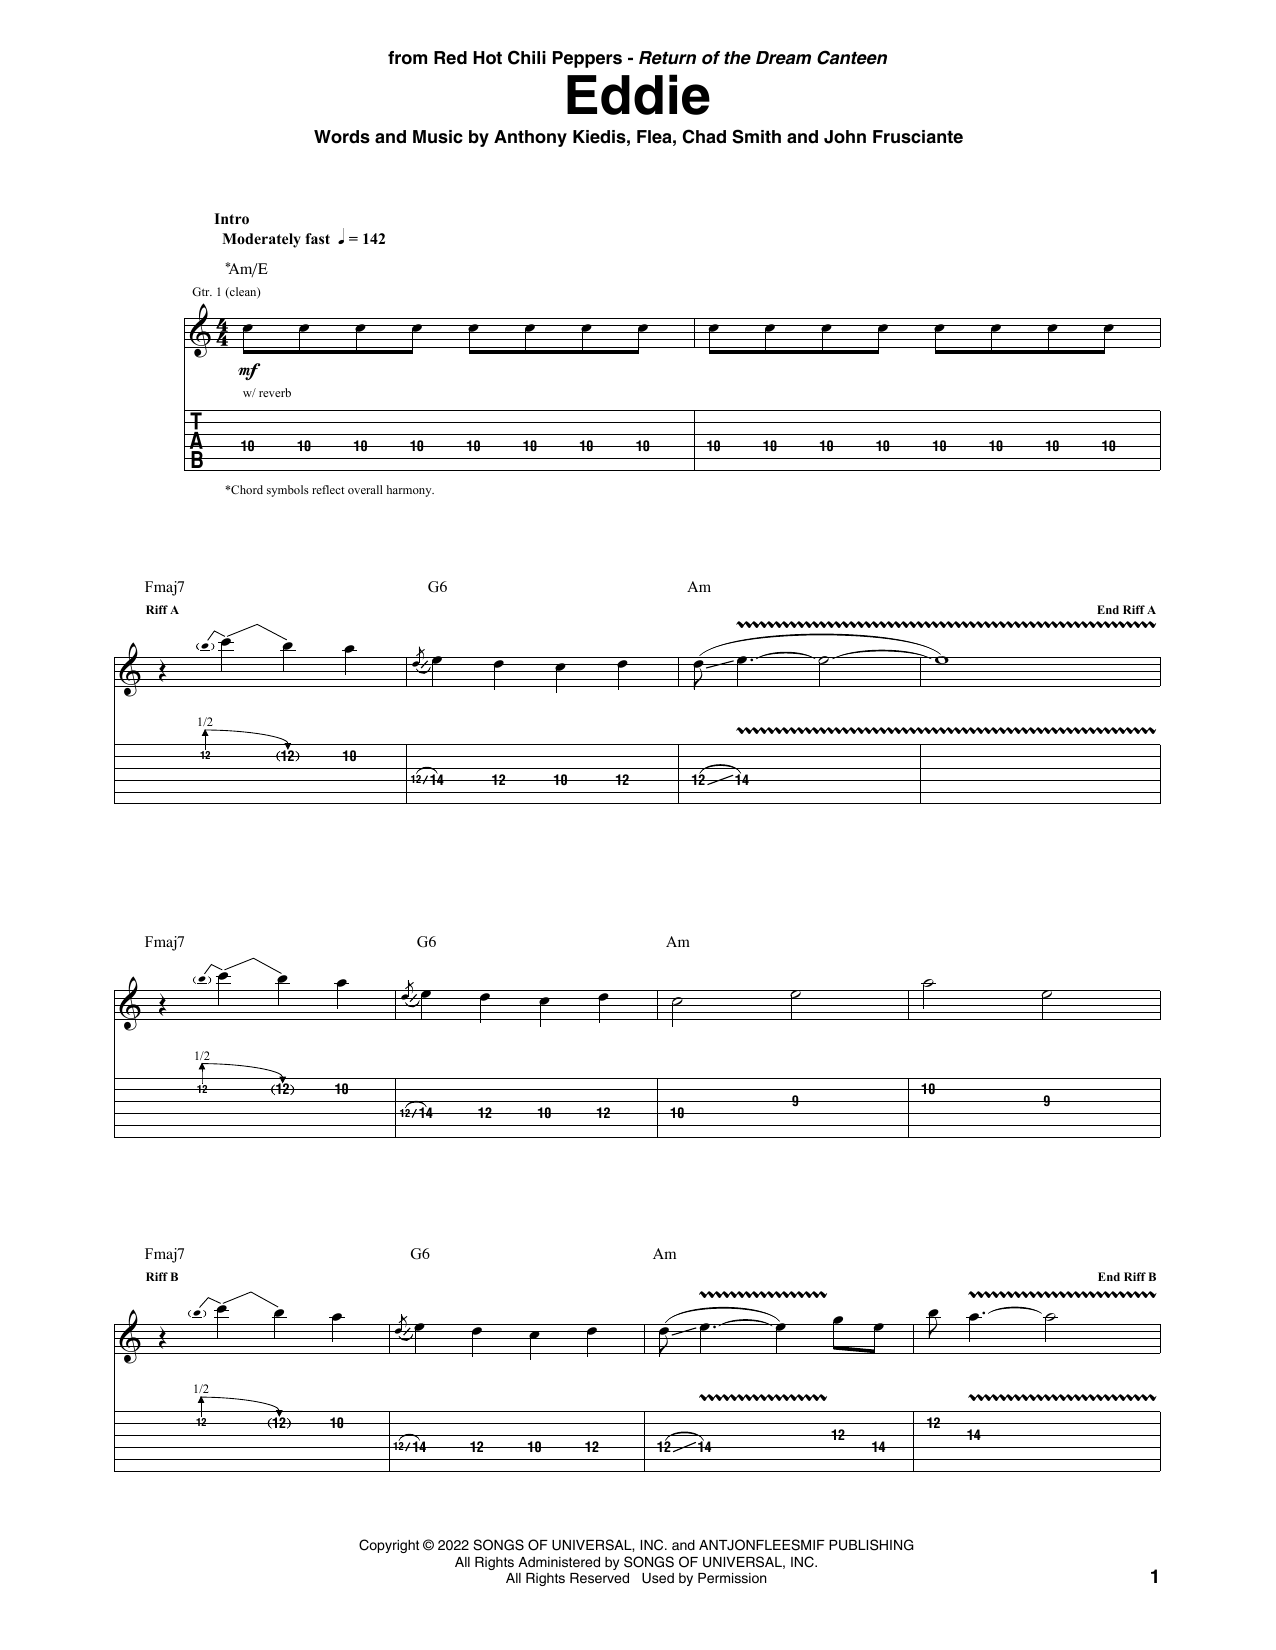 Download Red Hot Chili Peppers Eddie Sheet Music